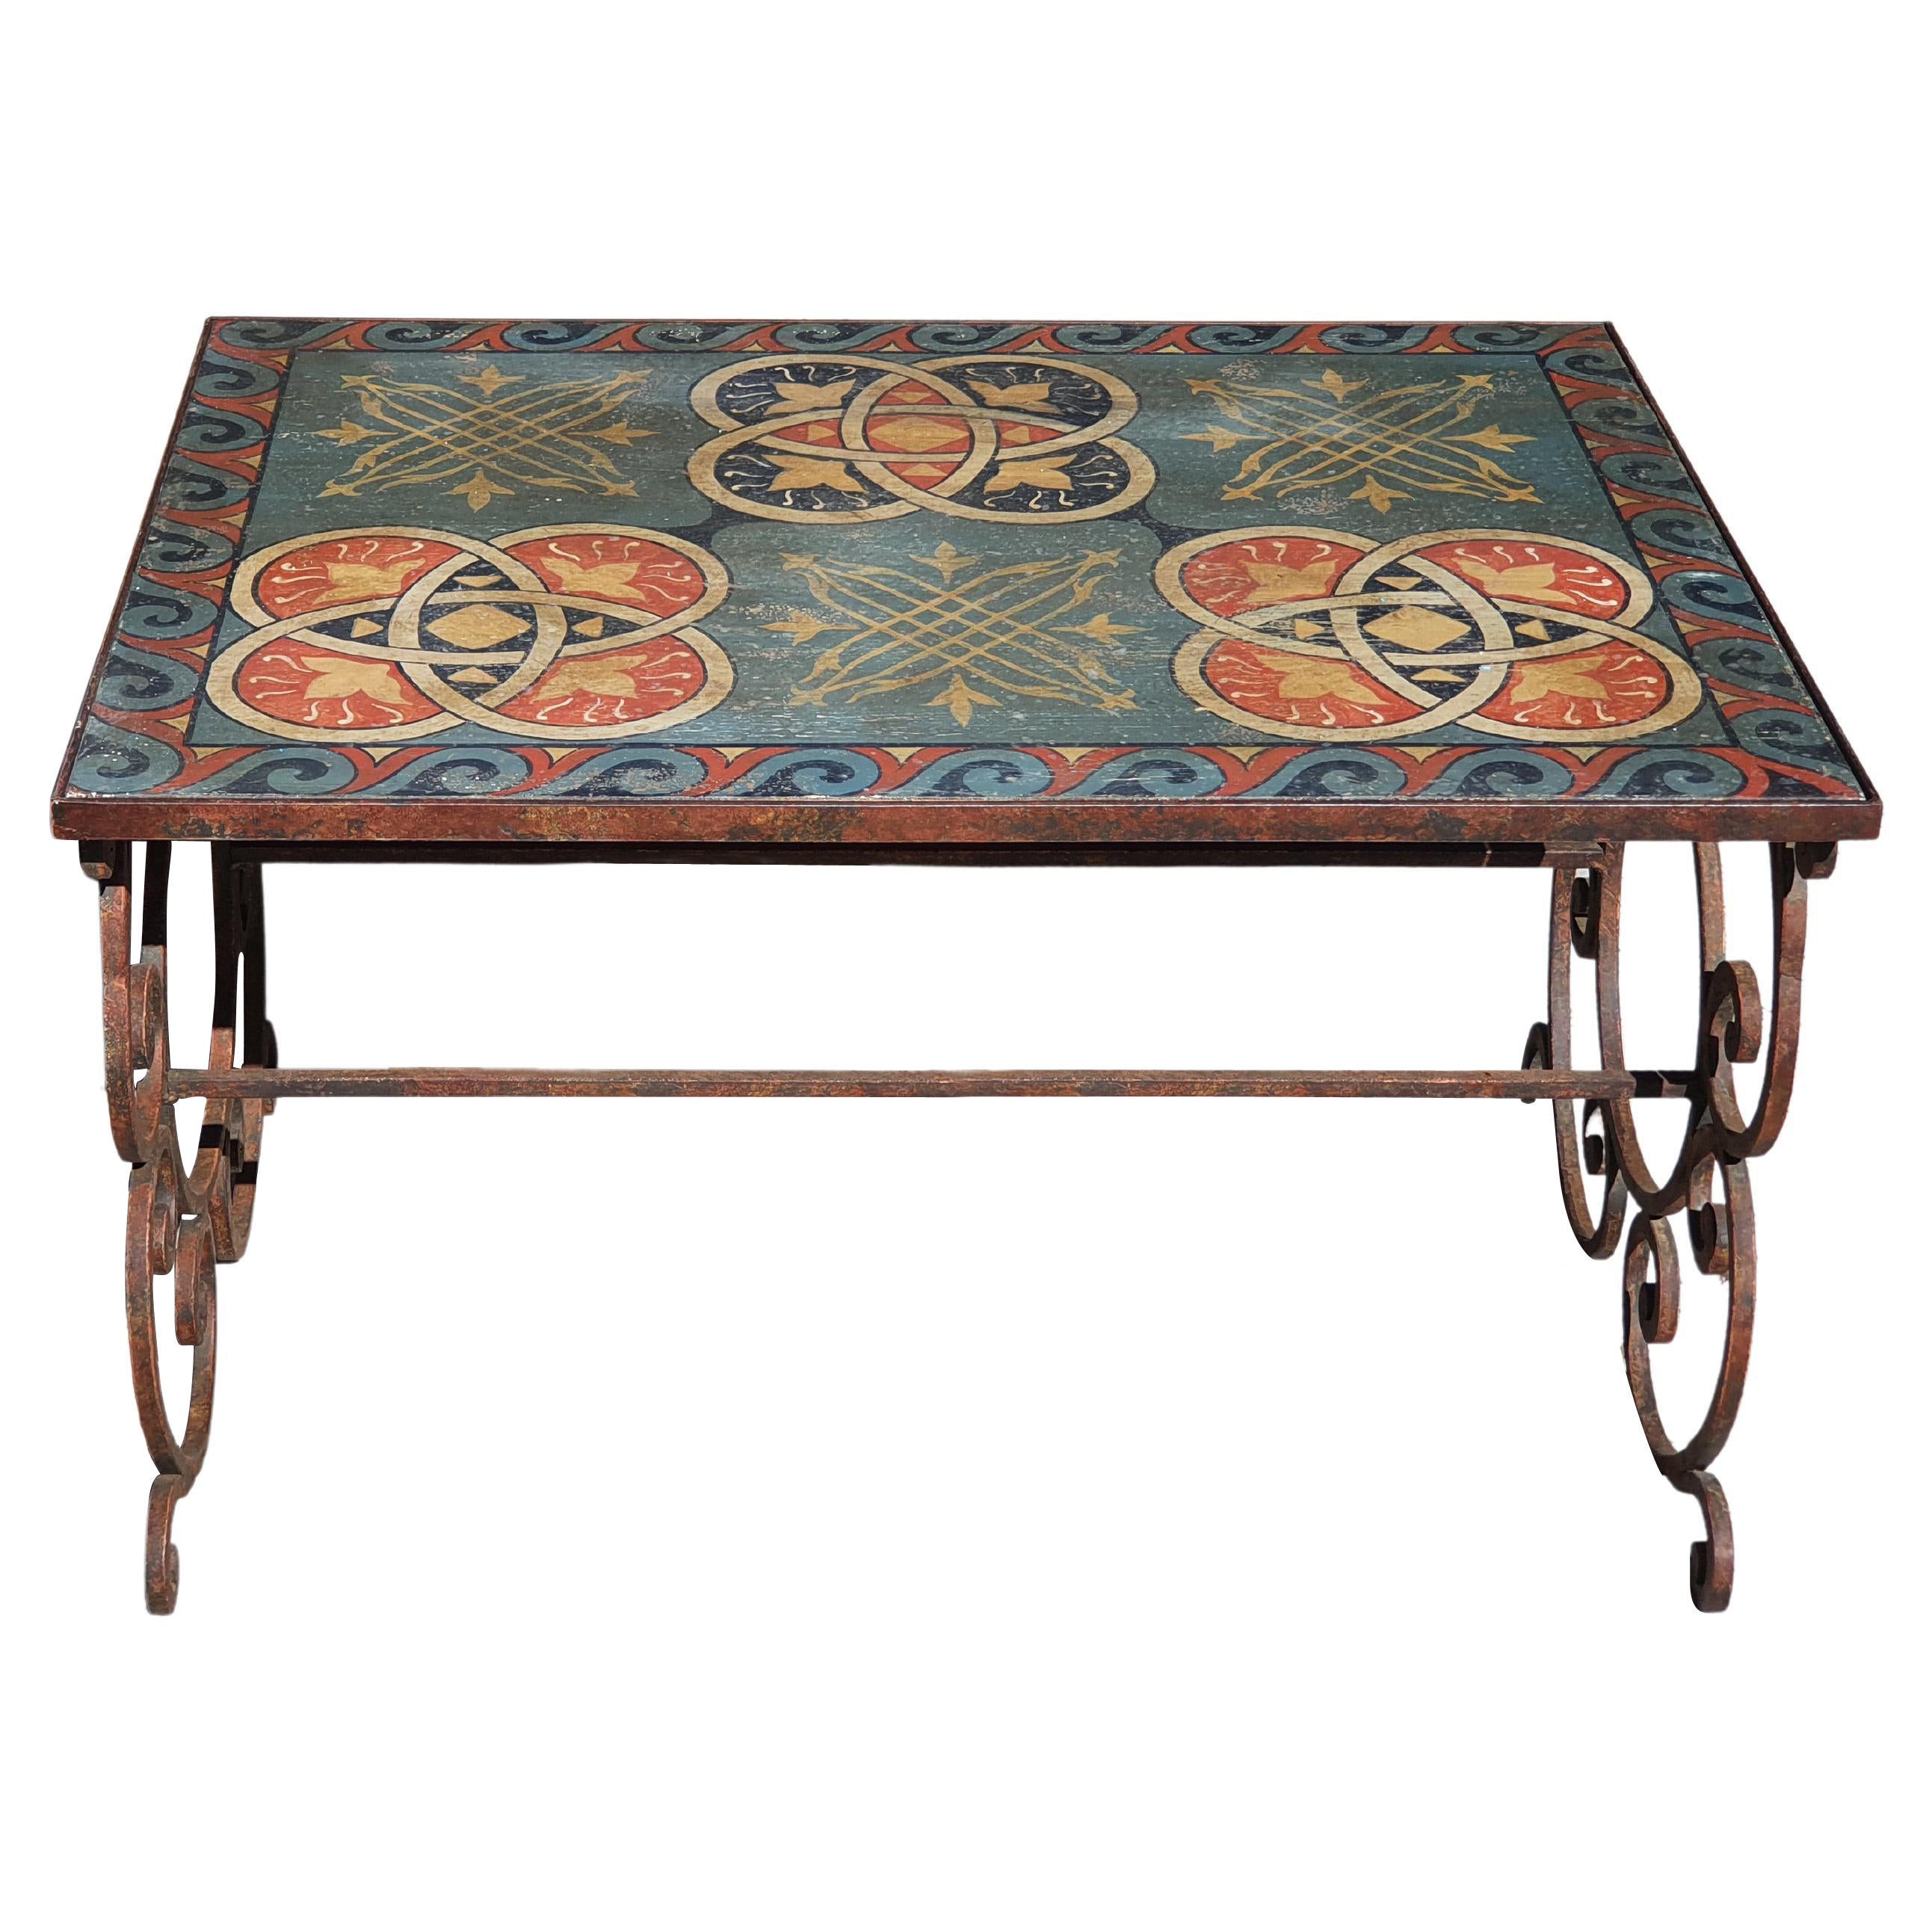 21st Century Italian Wrought Iron and Hand-Painted Wood Coffee Table, 2010 For Sale